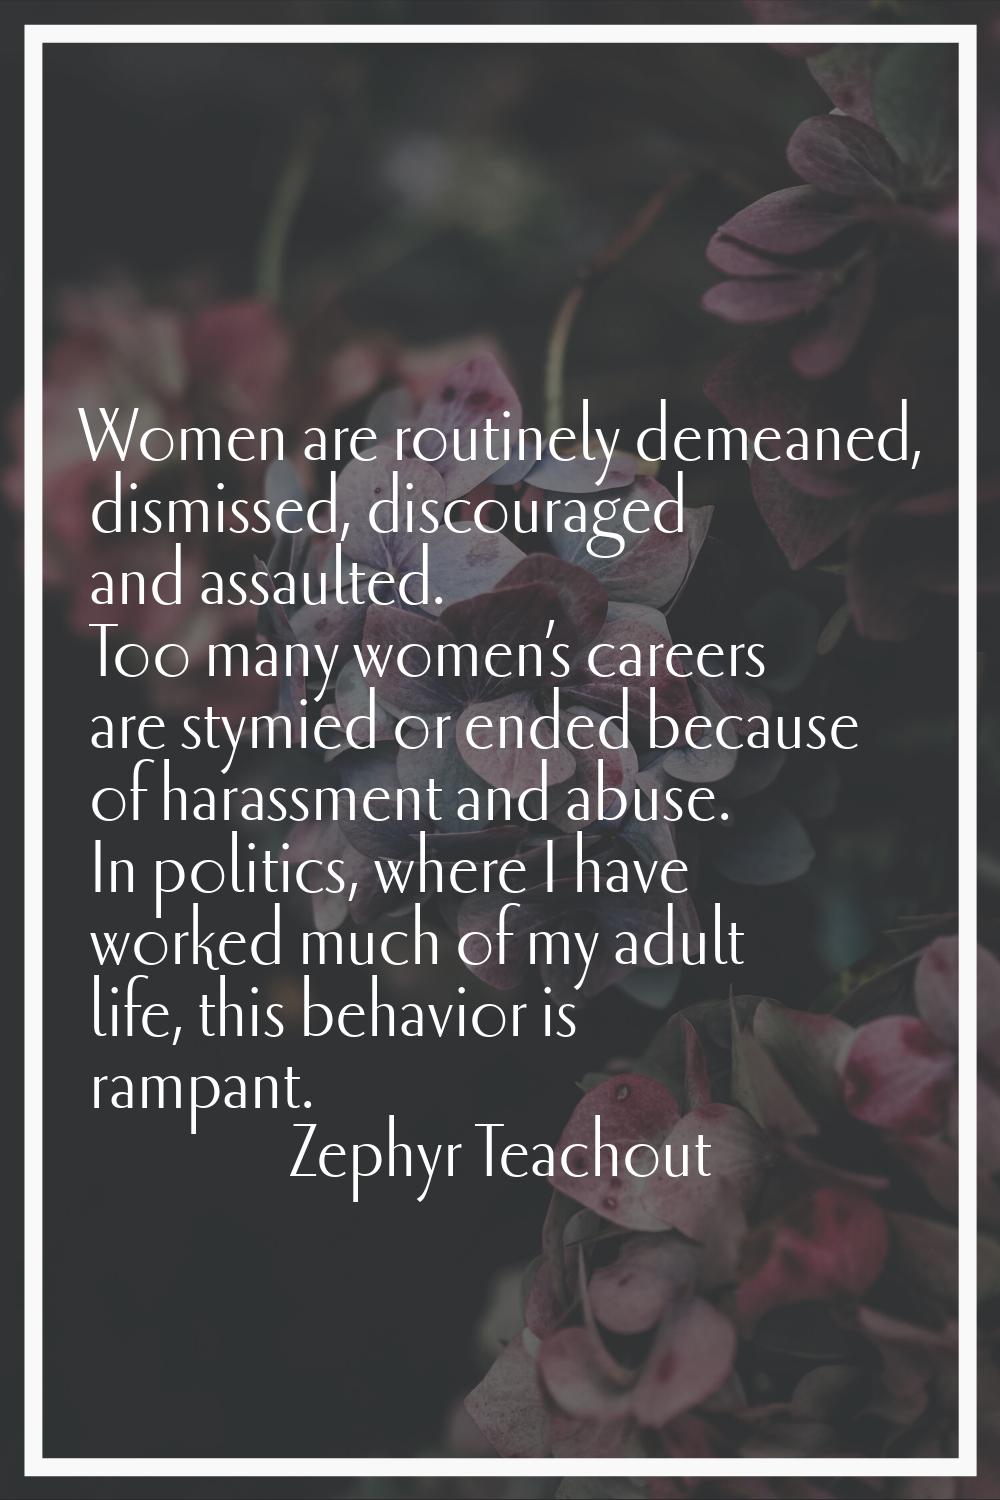 Women are routinely demeaned, dismissed, discouraged and assaulted. Too many women’s careers are st